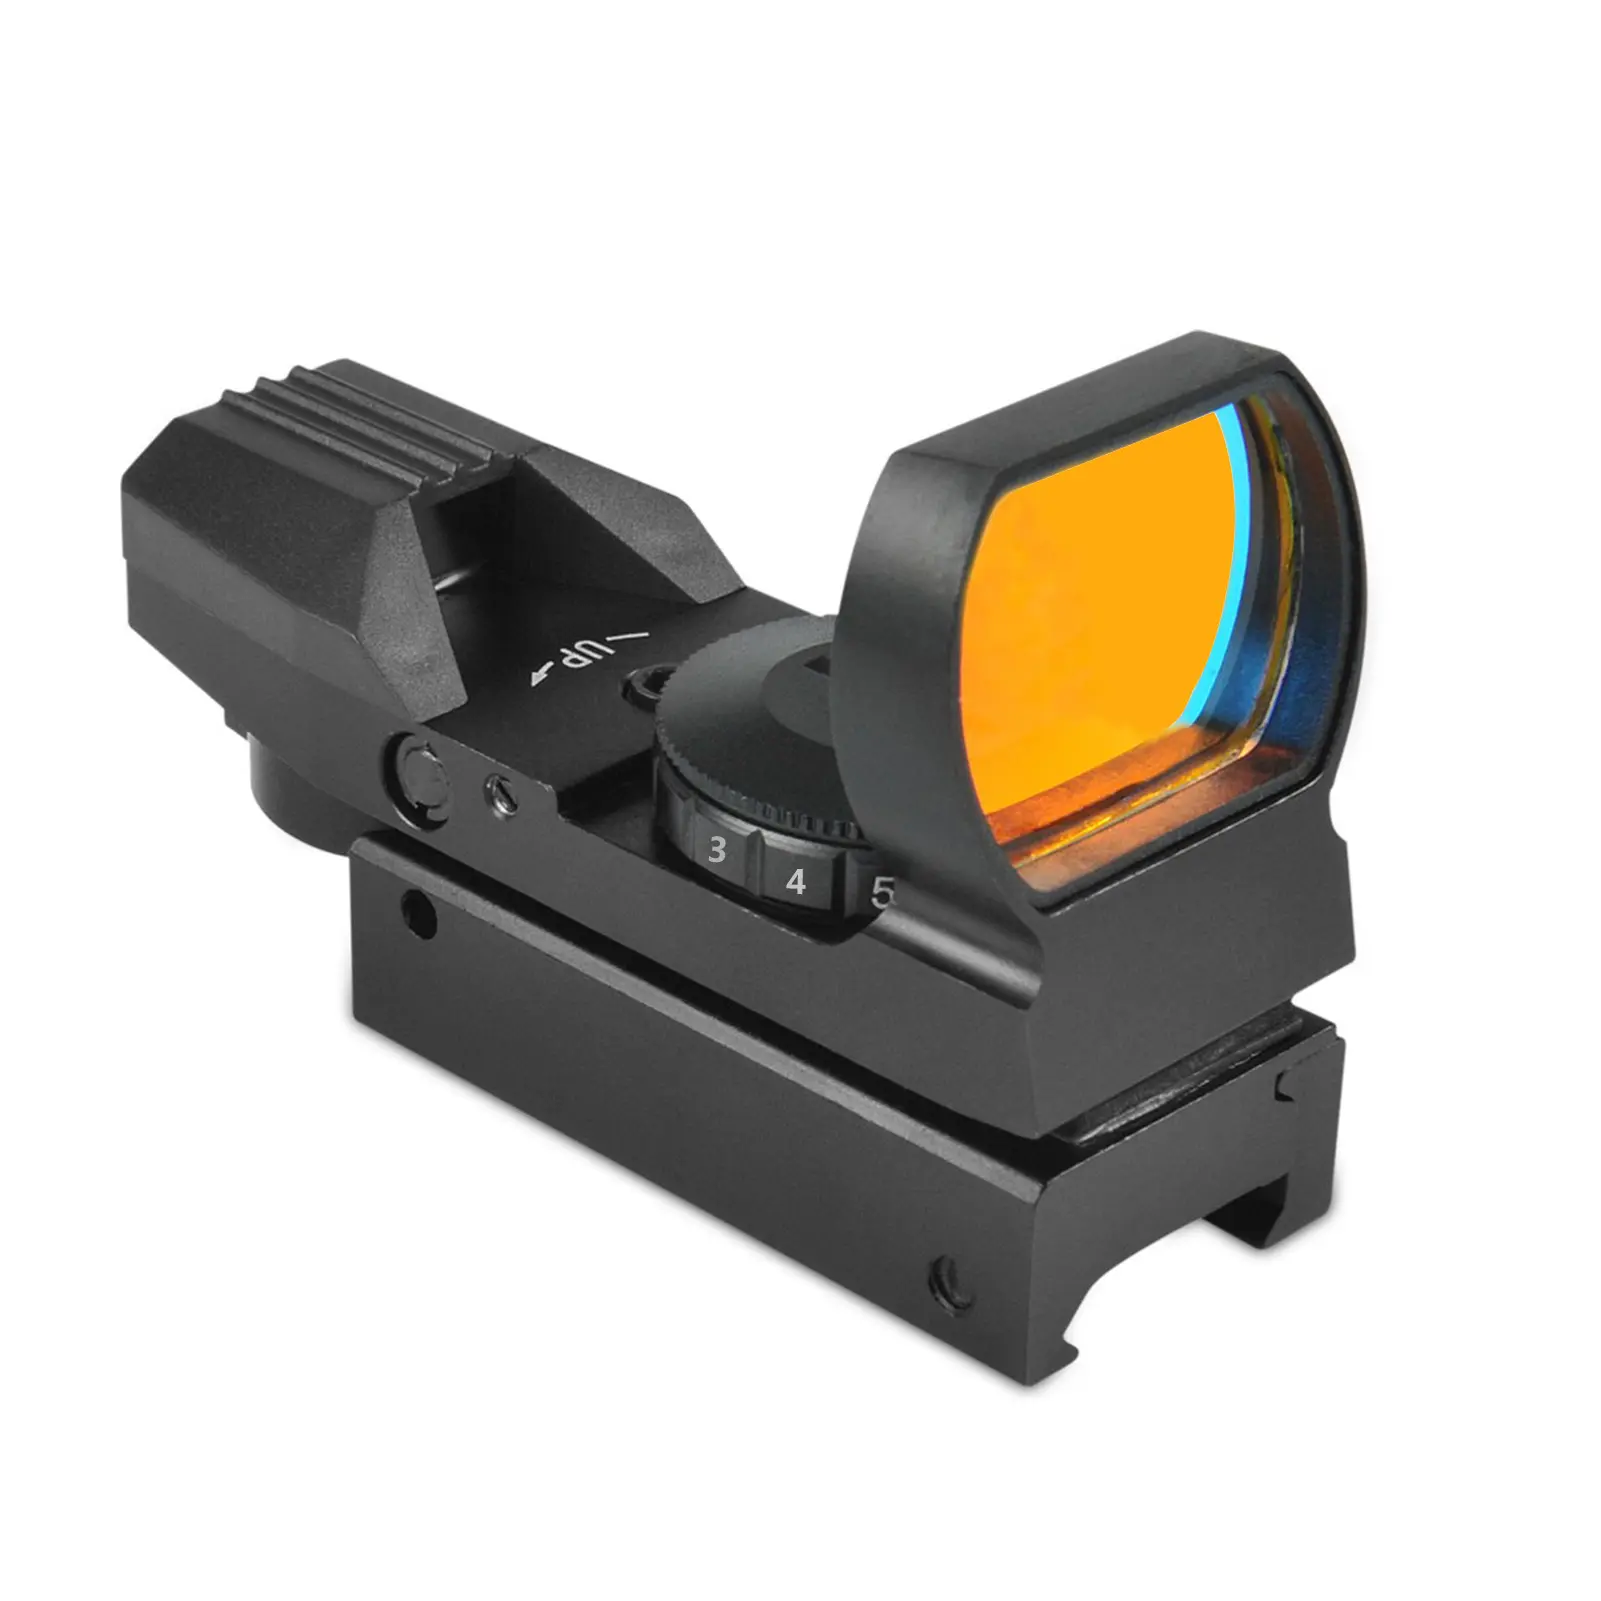 LUGER HD101 1x22x33mm Reflex Sight 4 Reticle Pattern Red Dot Sight 11 Brightness Level for Hunting Fit for 20mm